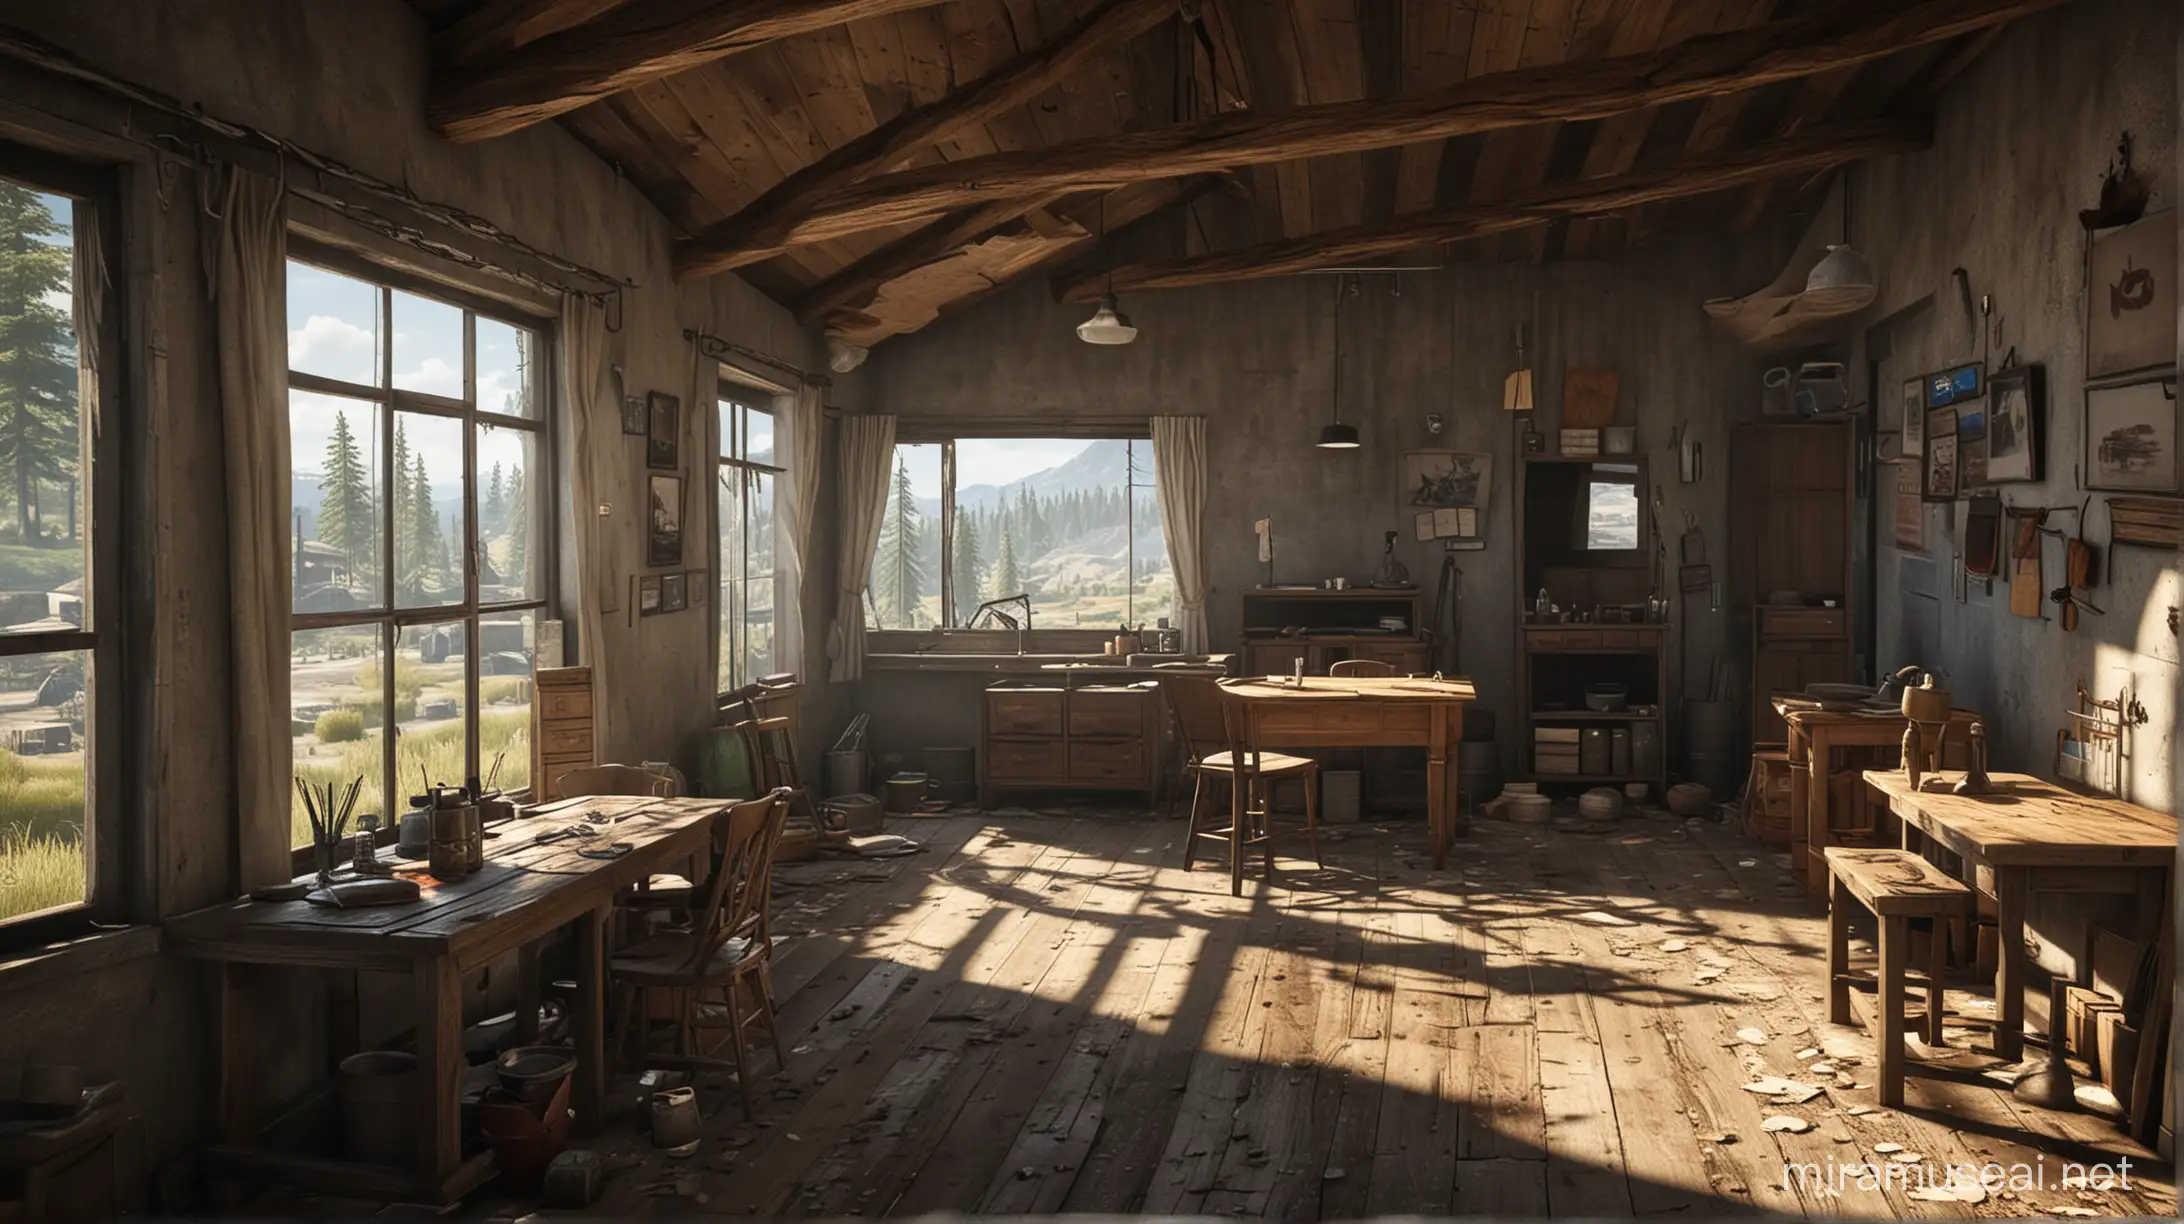 far cry 5 style environment , interior , something interesting not a normal house interior